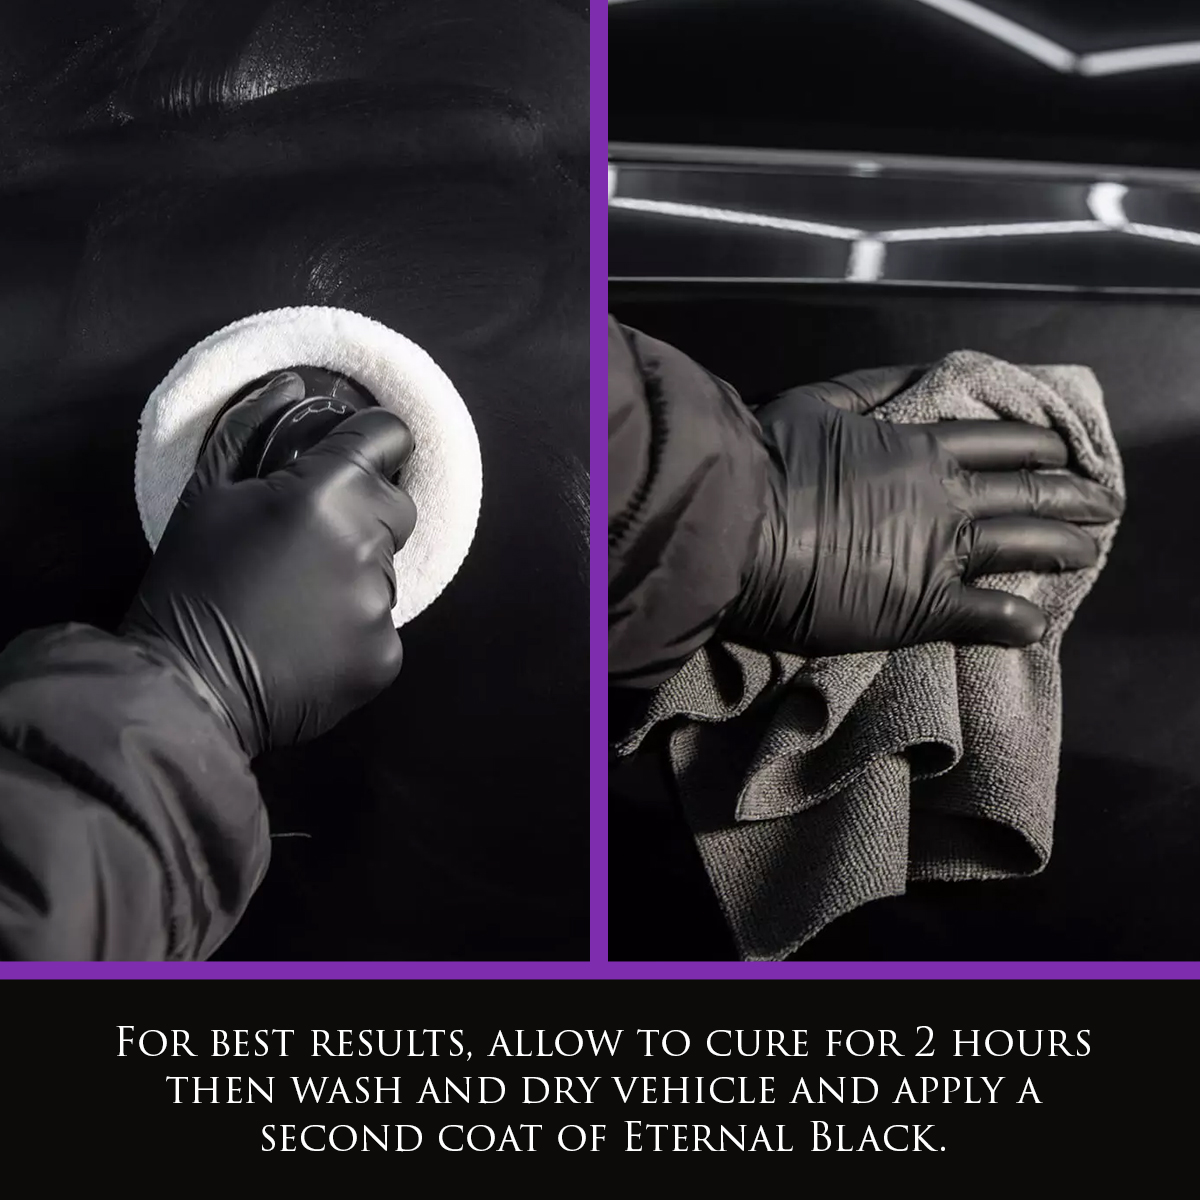 Left Image shows Eternal Black Ceramic SiO2 Wax being applied to a car with a white microfibre sponge applicator. Right Image shows Eternal Black Ceramic SiO2 Wax being buffed off a black vehicle. Text: For best results, allow to cure for 2 hours then wash and dry vehicle and apply a second coat of Eternal Black.